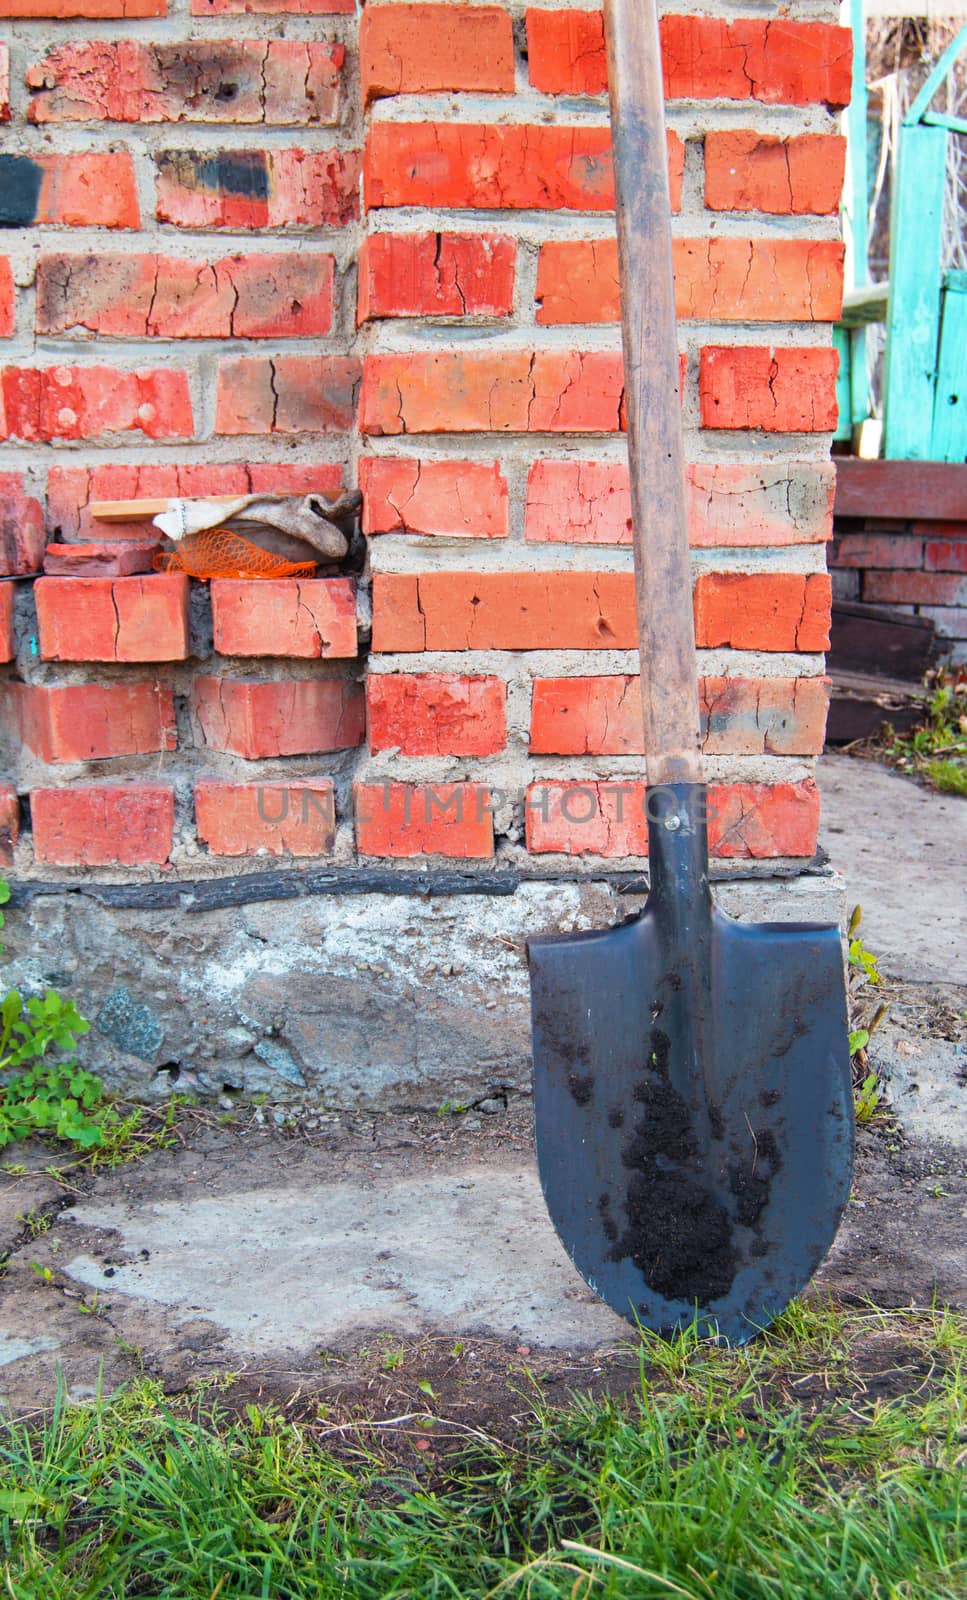 Metal shovel with wooden handle is a brick wall of the rural house.